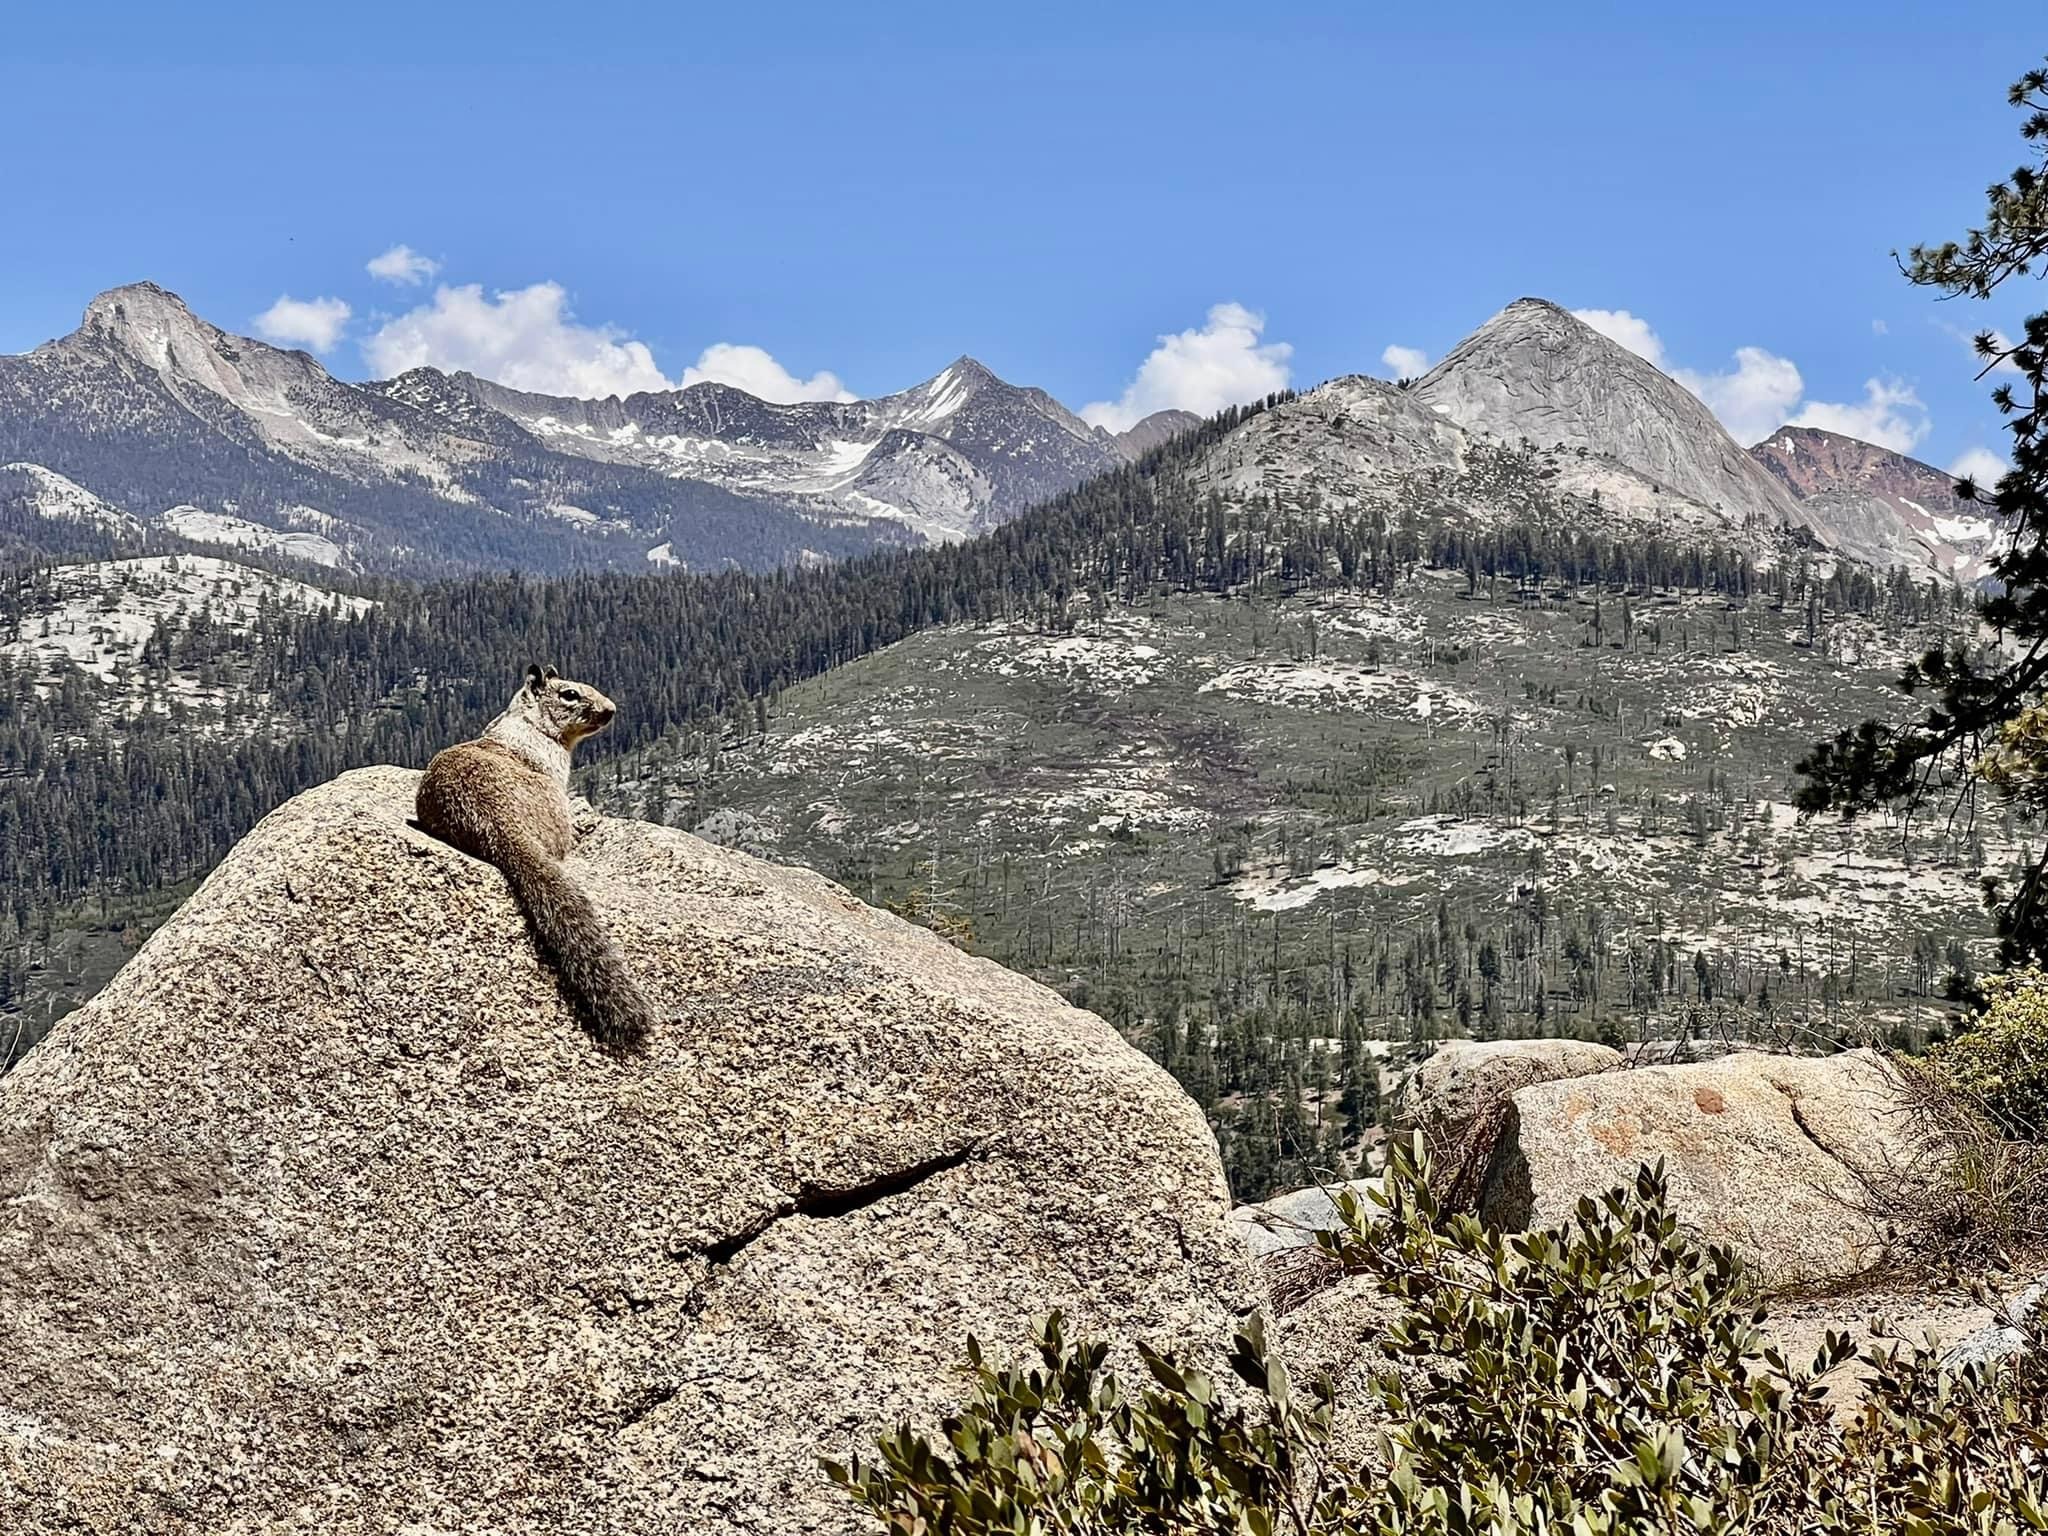 A photograph of a marmot on granite at Glacier Point, looking out over Yosemite. By Linda Wurstner